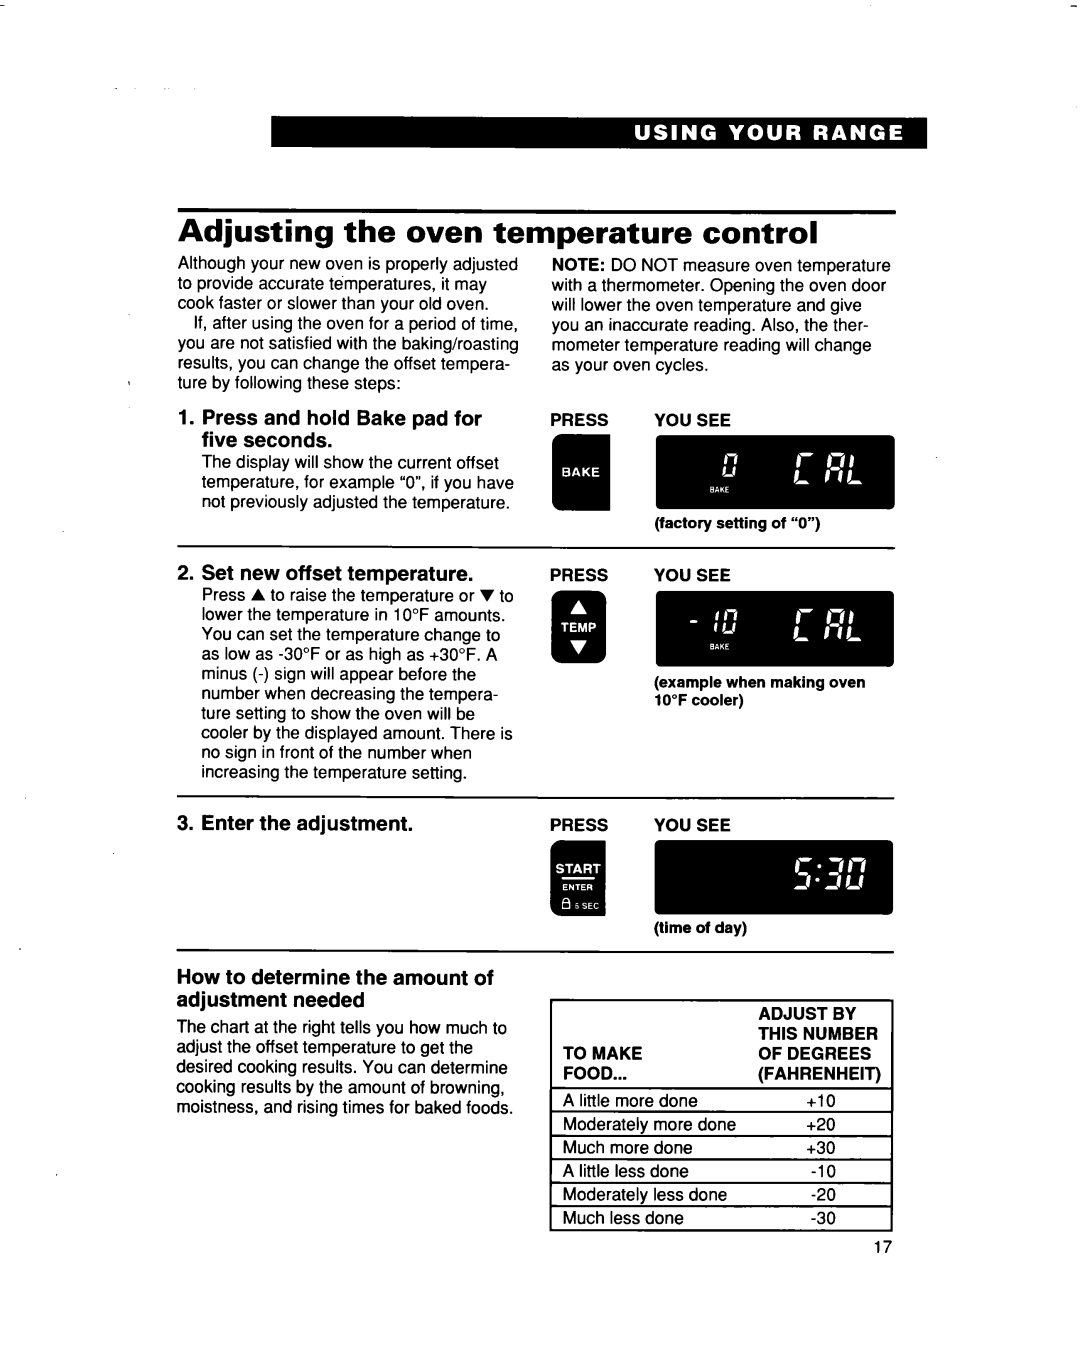 Whirlpool RF364BBD Adjusting the oven temperature control, Press and hold Bake pad for five seconds, Enter the adjustment 